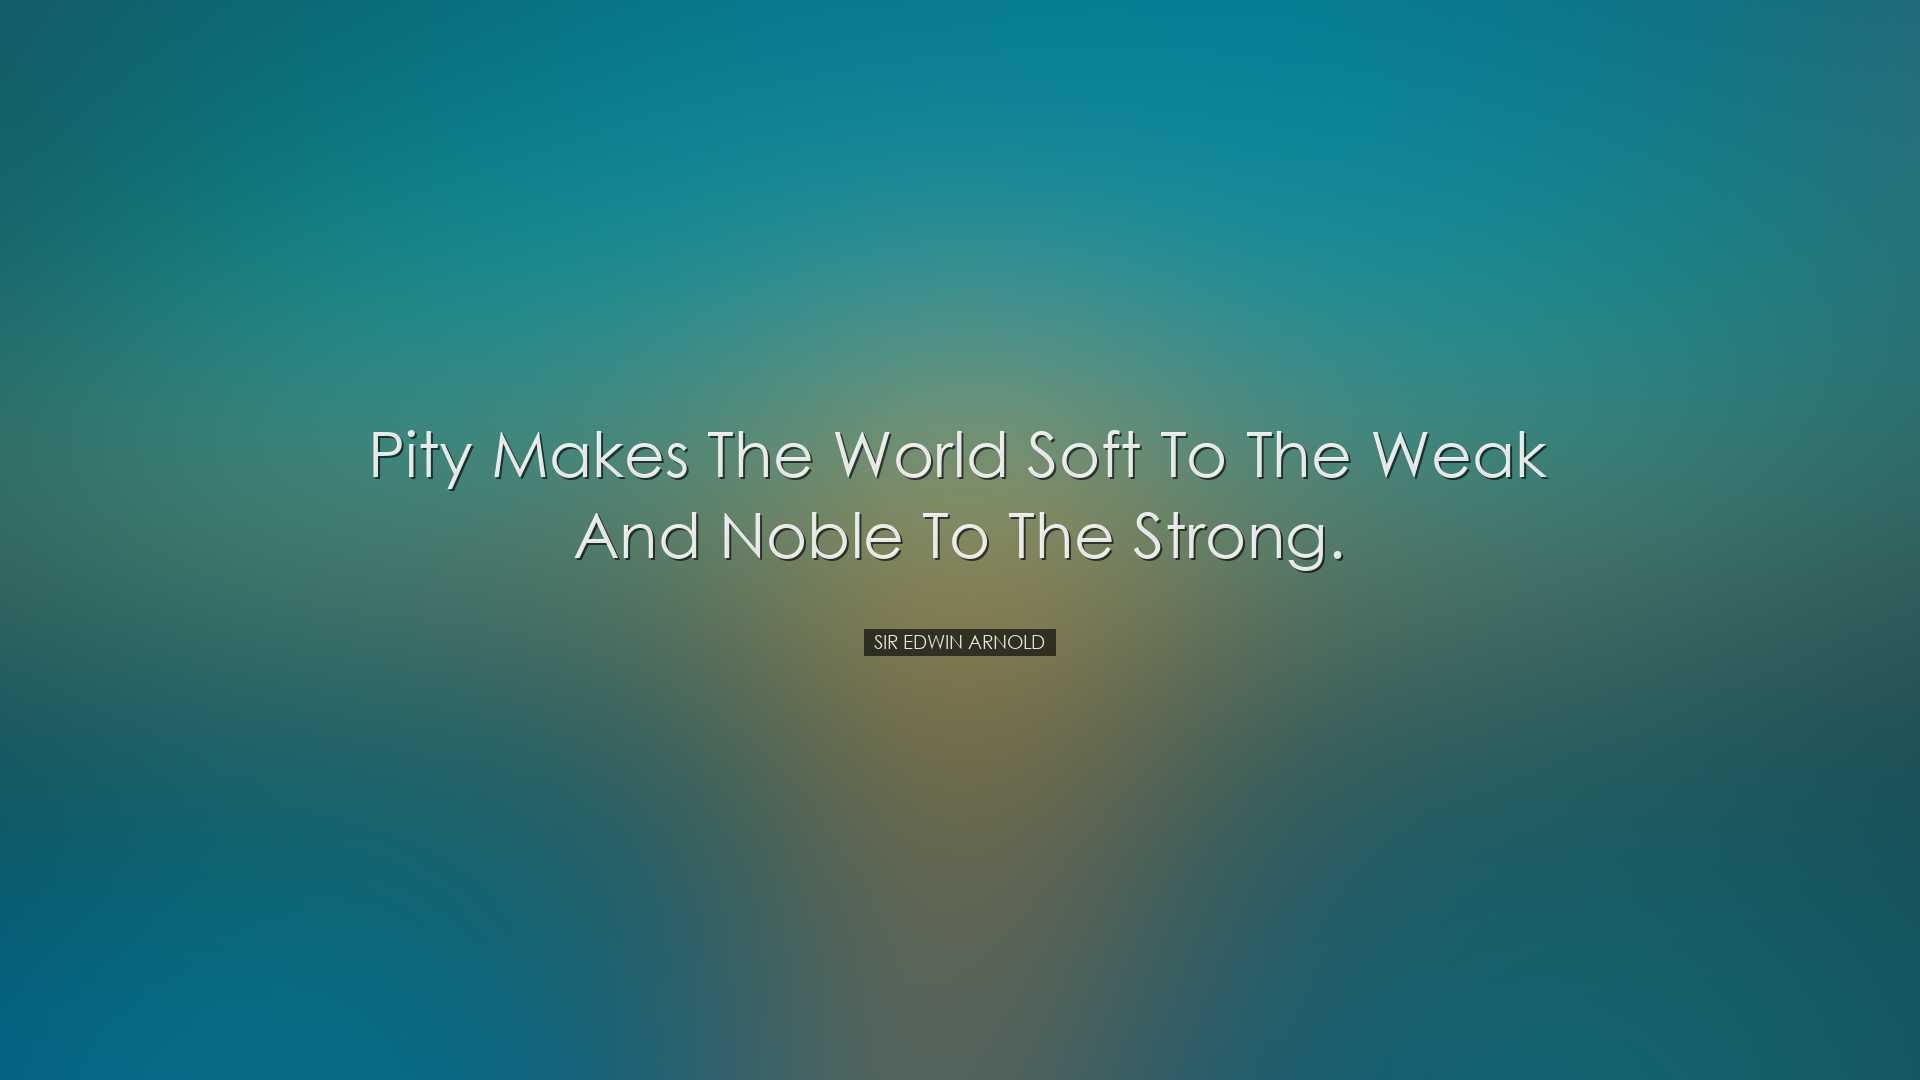 Pity makes the world soft to the weak and noble to the strong. - S